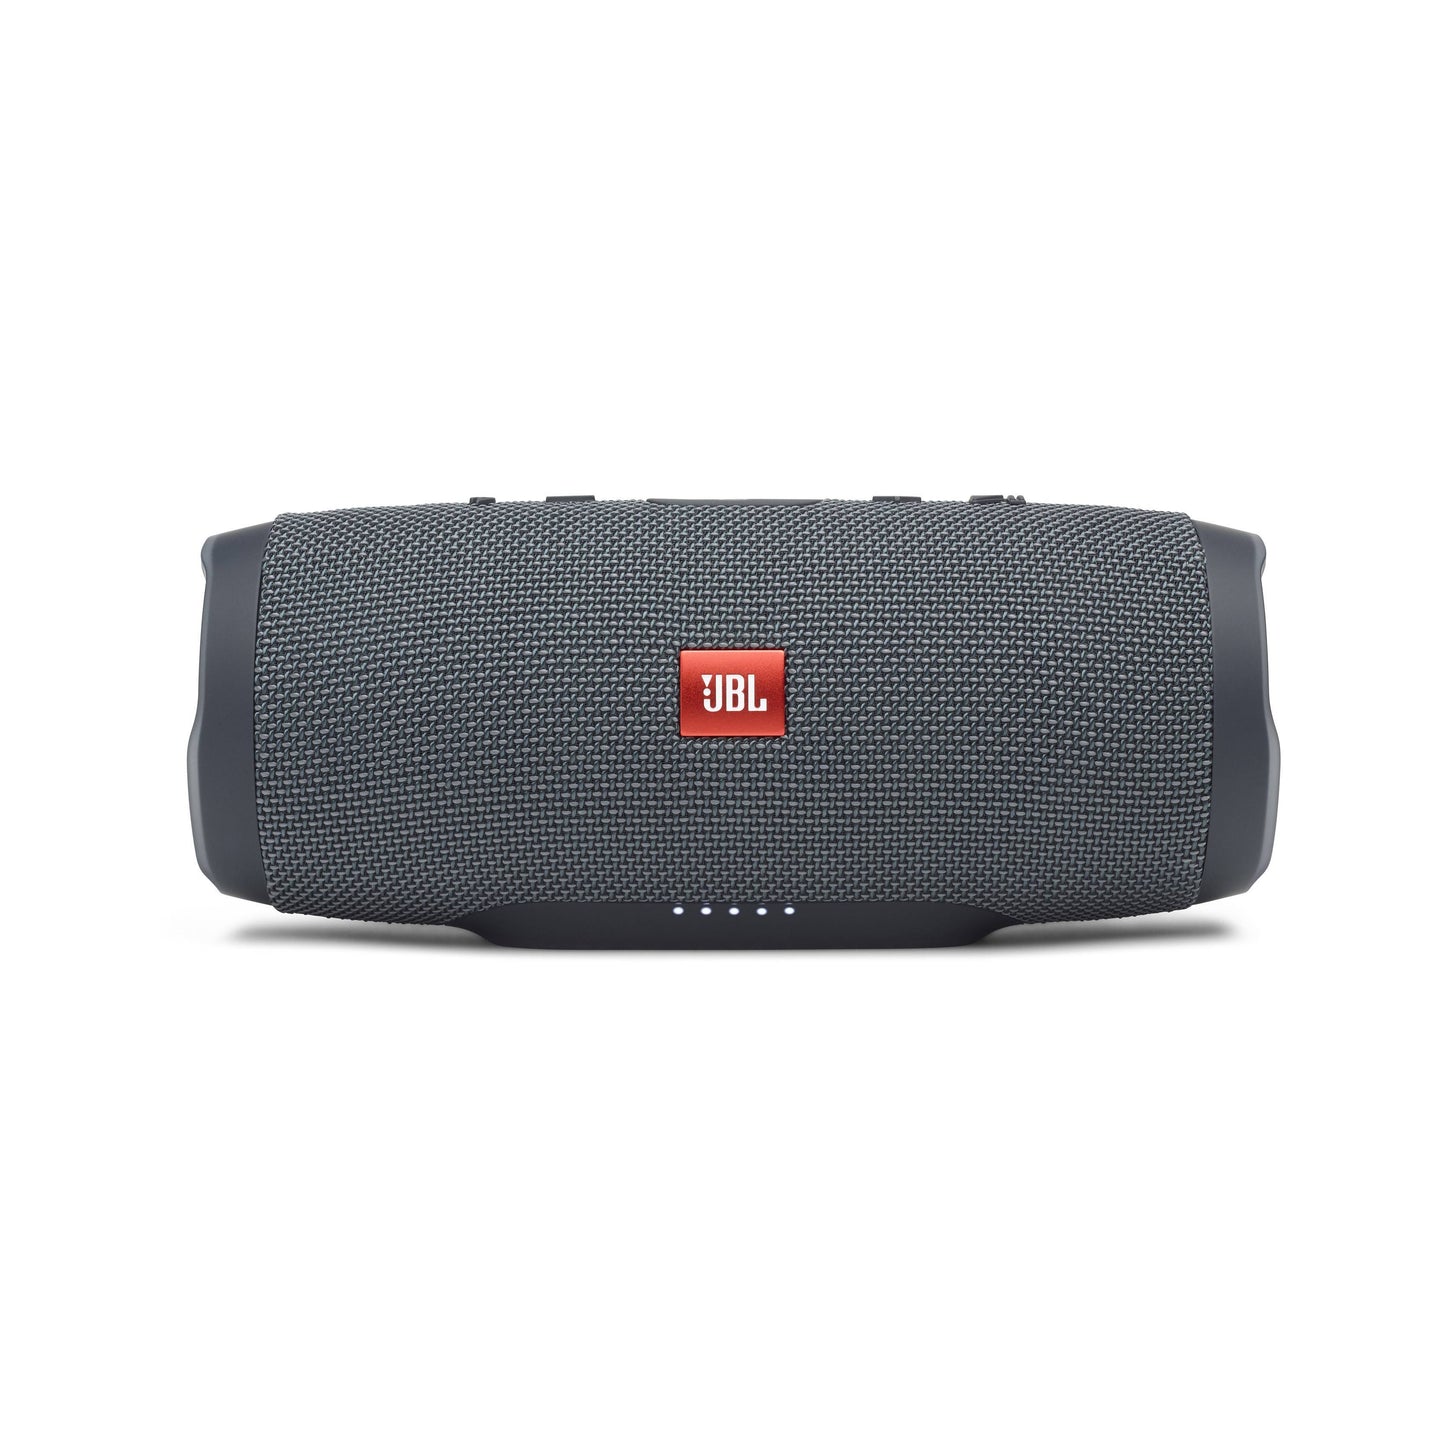 JBL Charge Essential Portable Bluetooth Speaker, IPX7 Waterproof Bluetooth Speaker, USB Port, Up to 20h of Battery Life